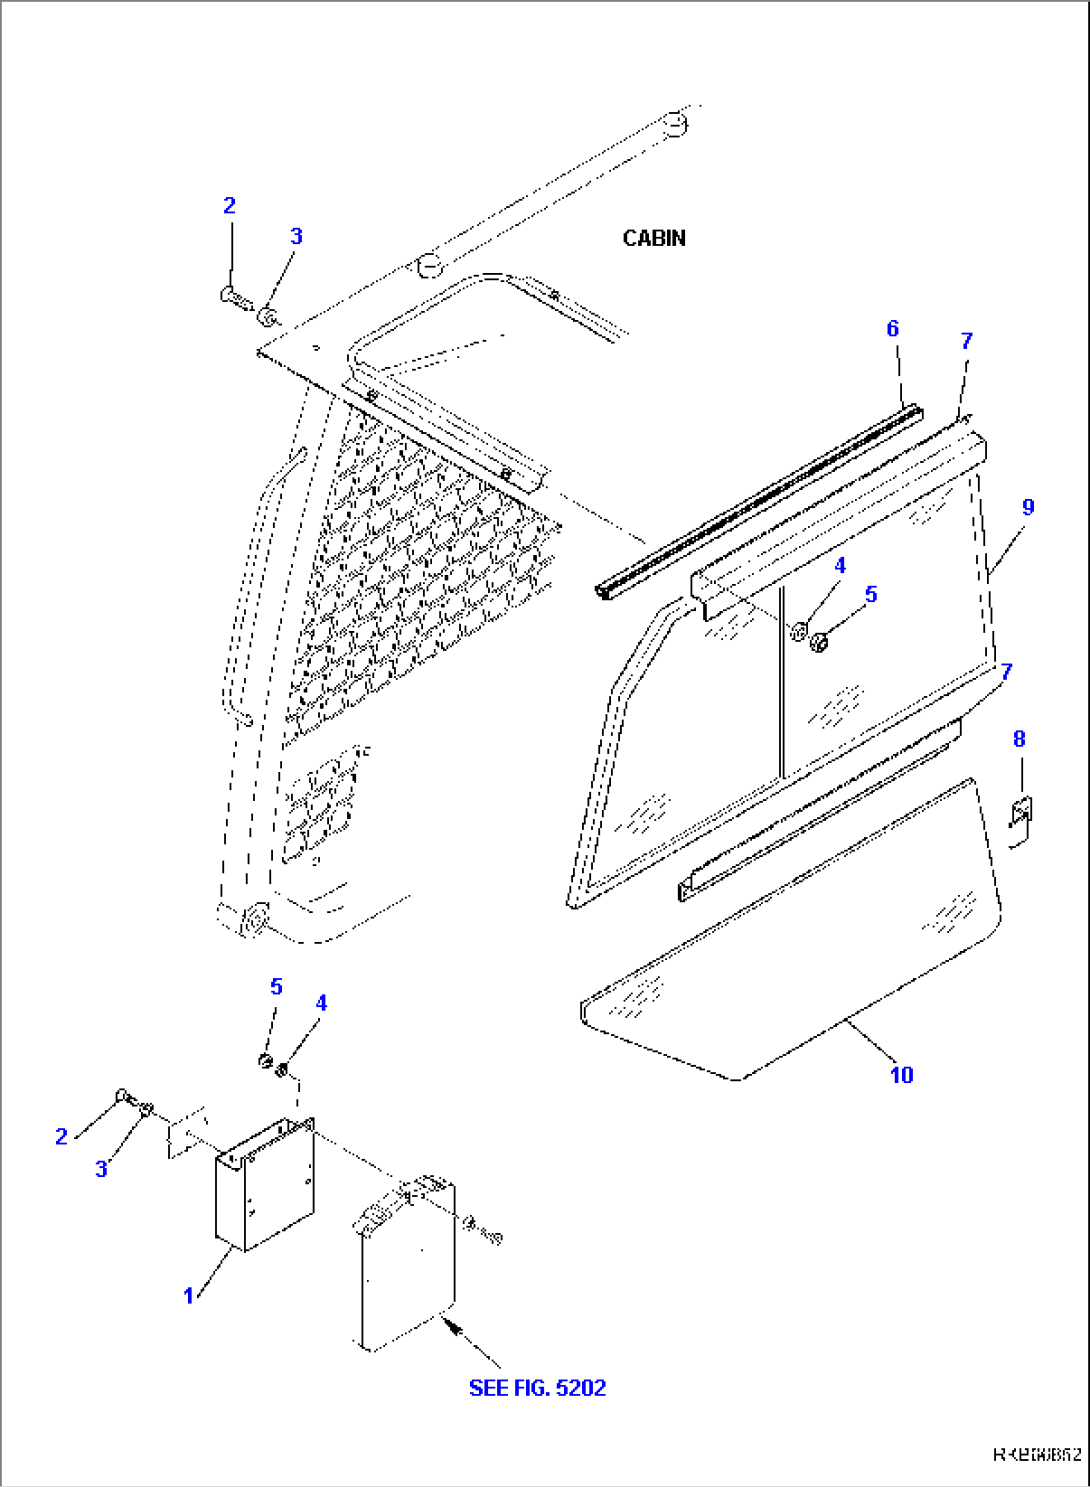 LATERAL SLIDING WINDOW (1/2)